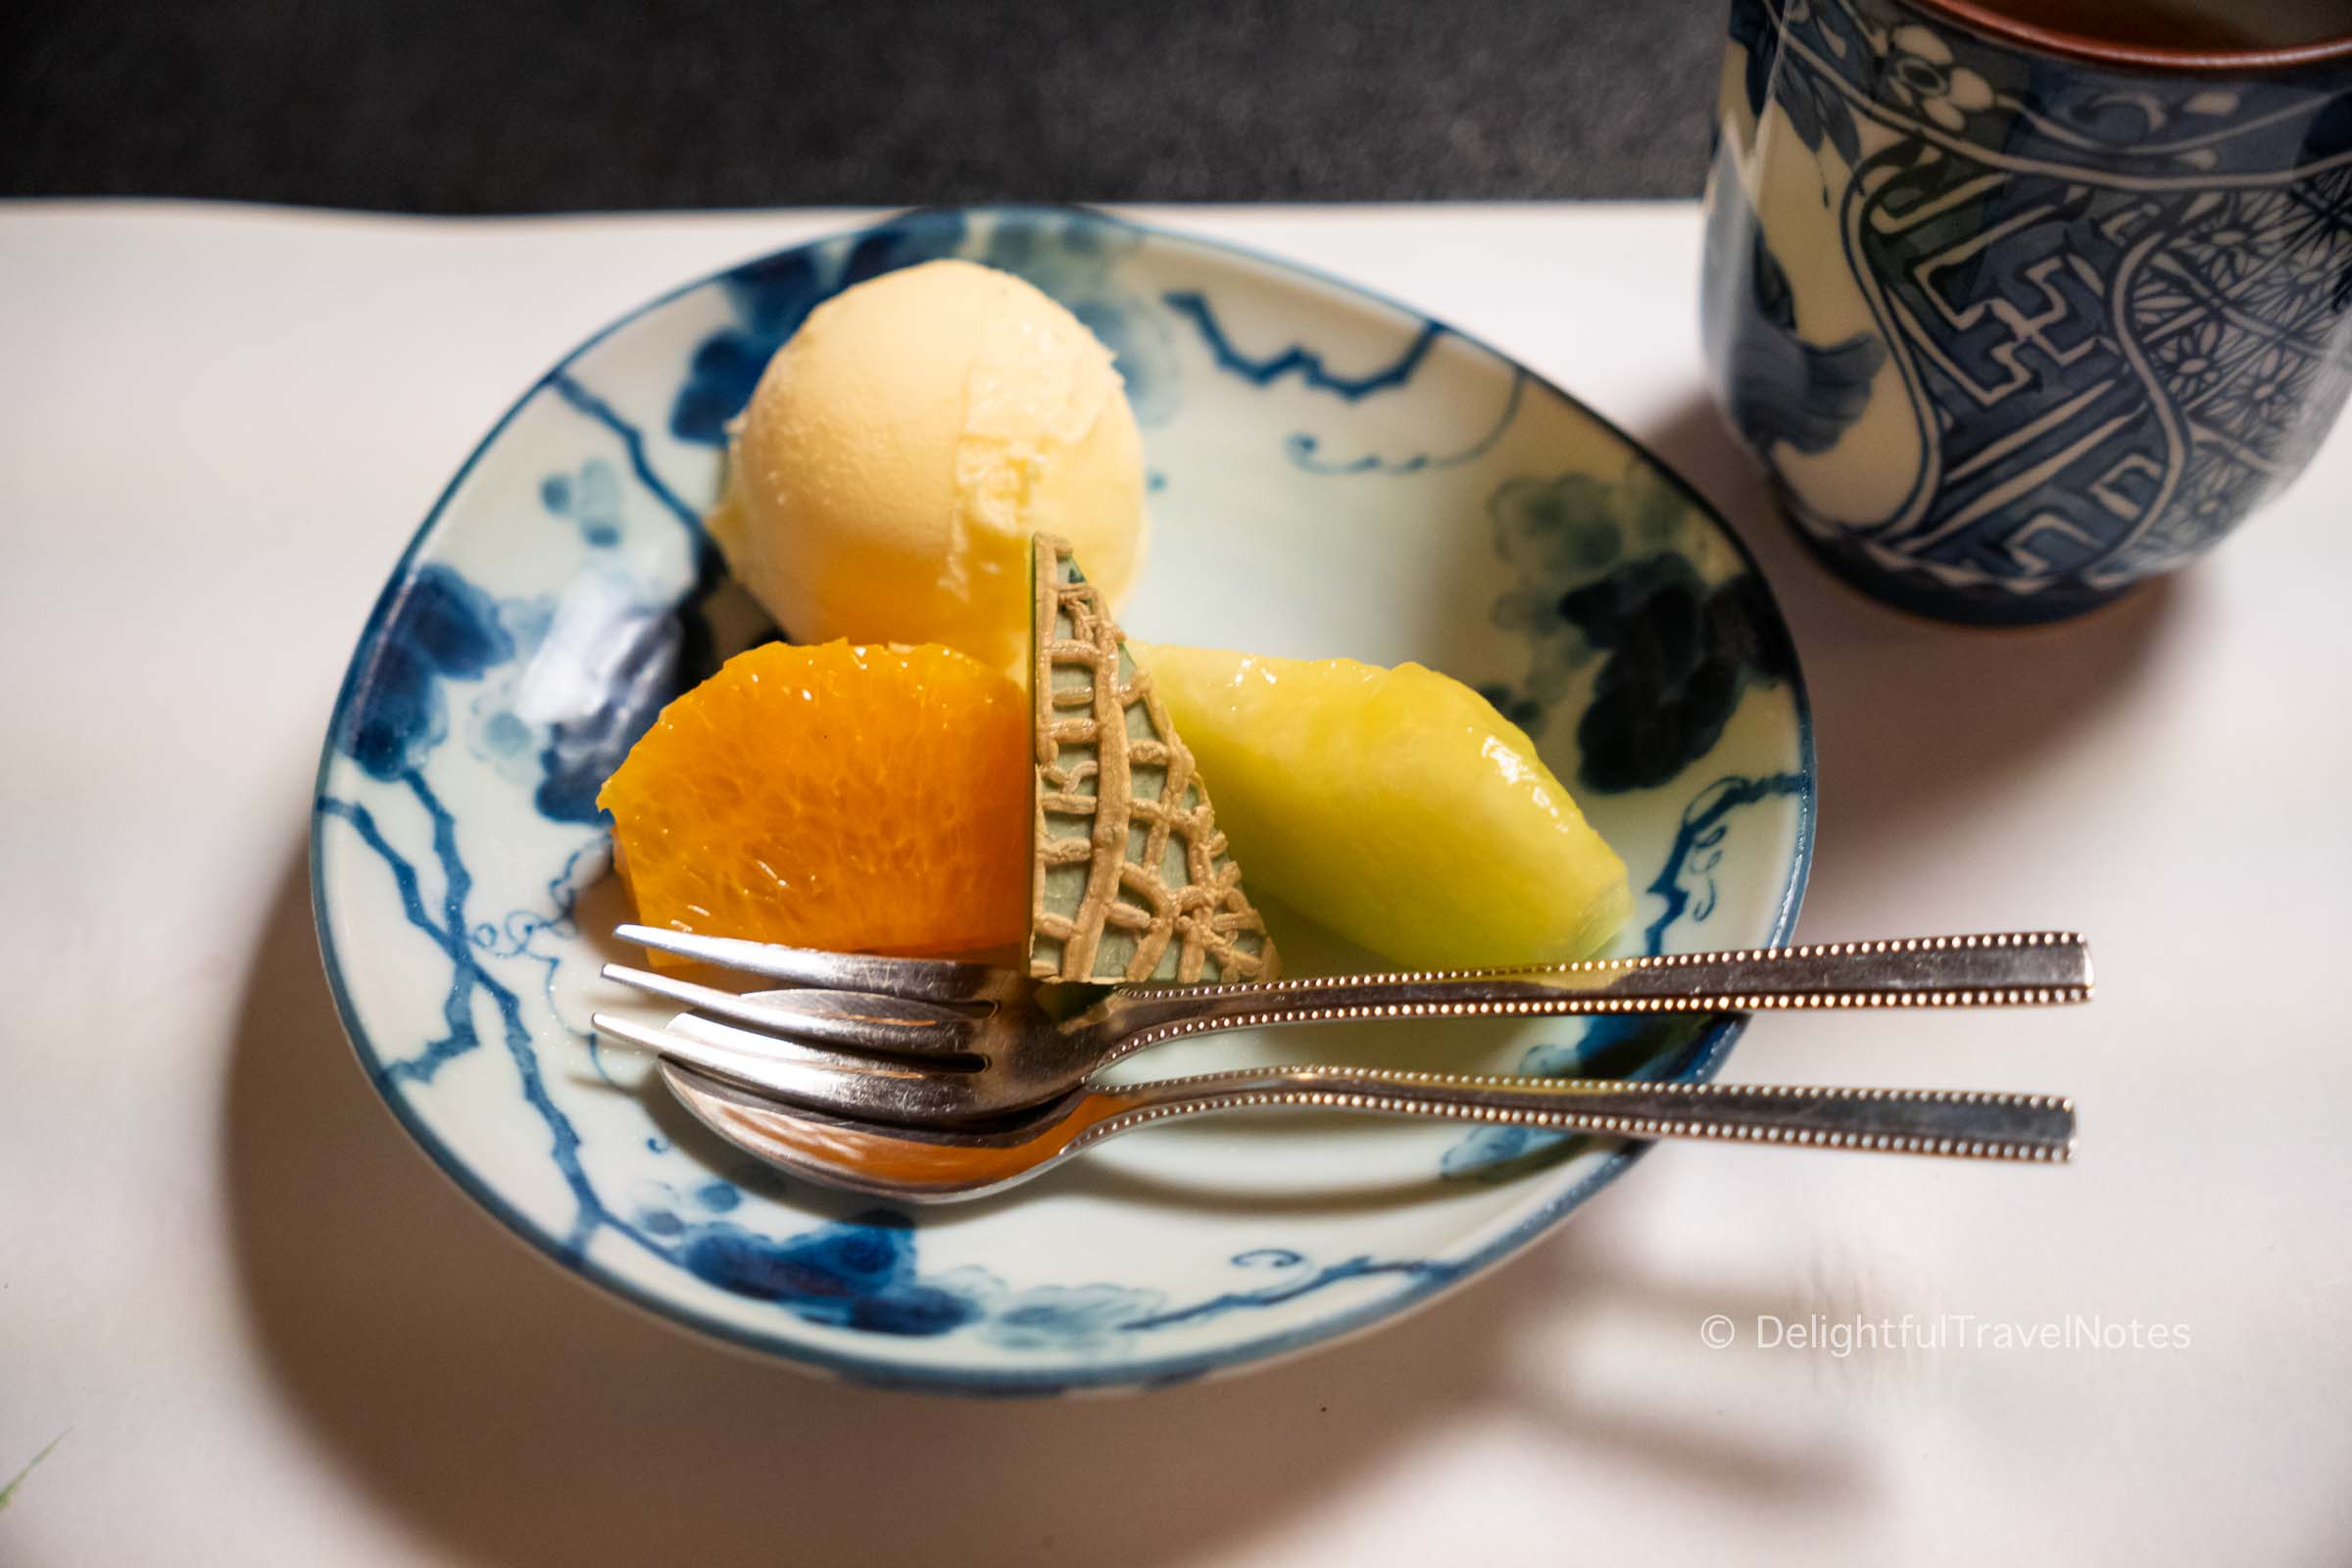 a plate of ice cream and fruits for desserts in Hanasaki Manjiro kaiseki dinner in Kyoto.